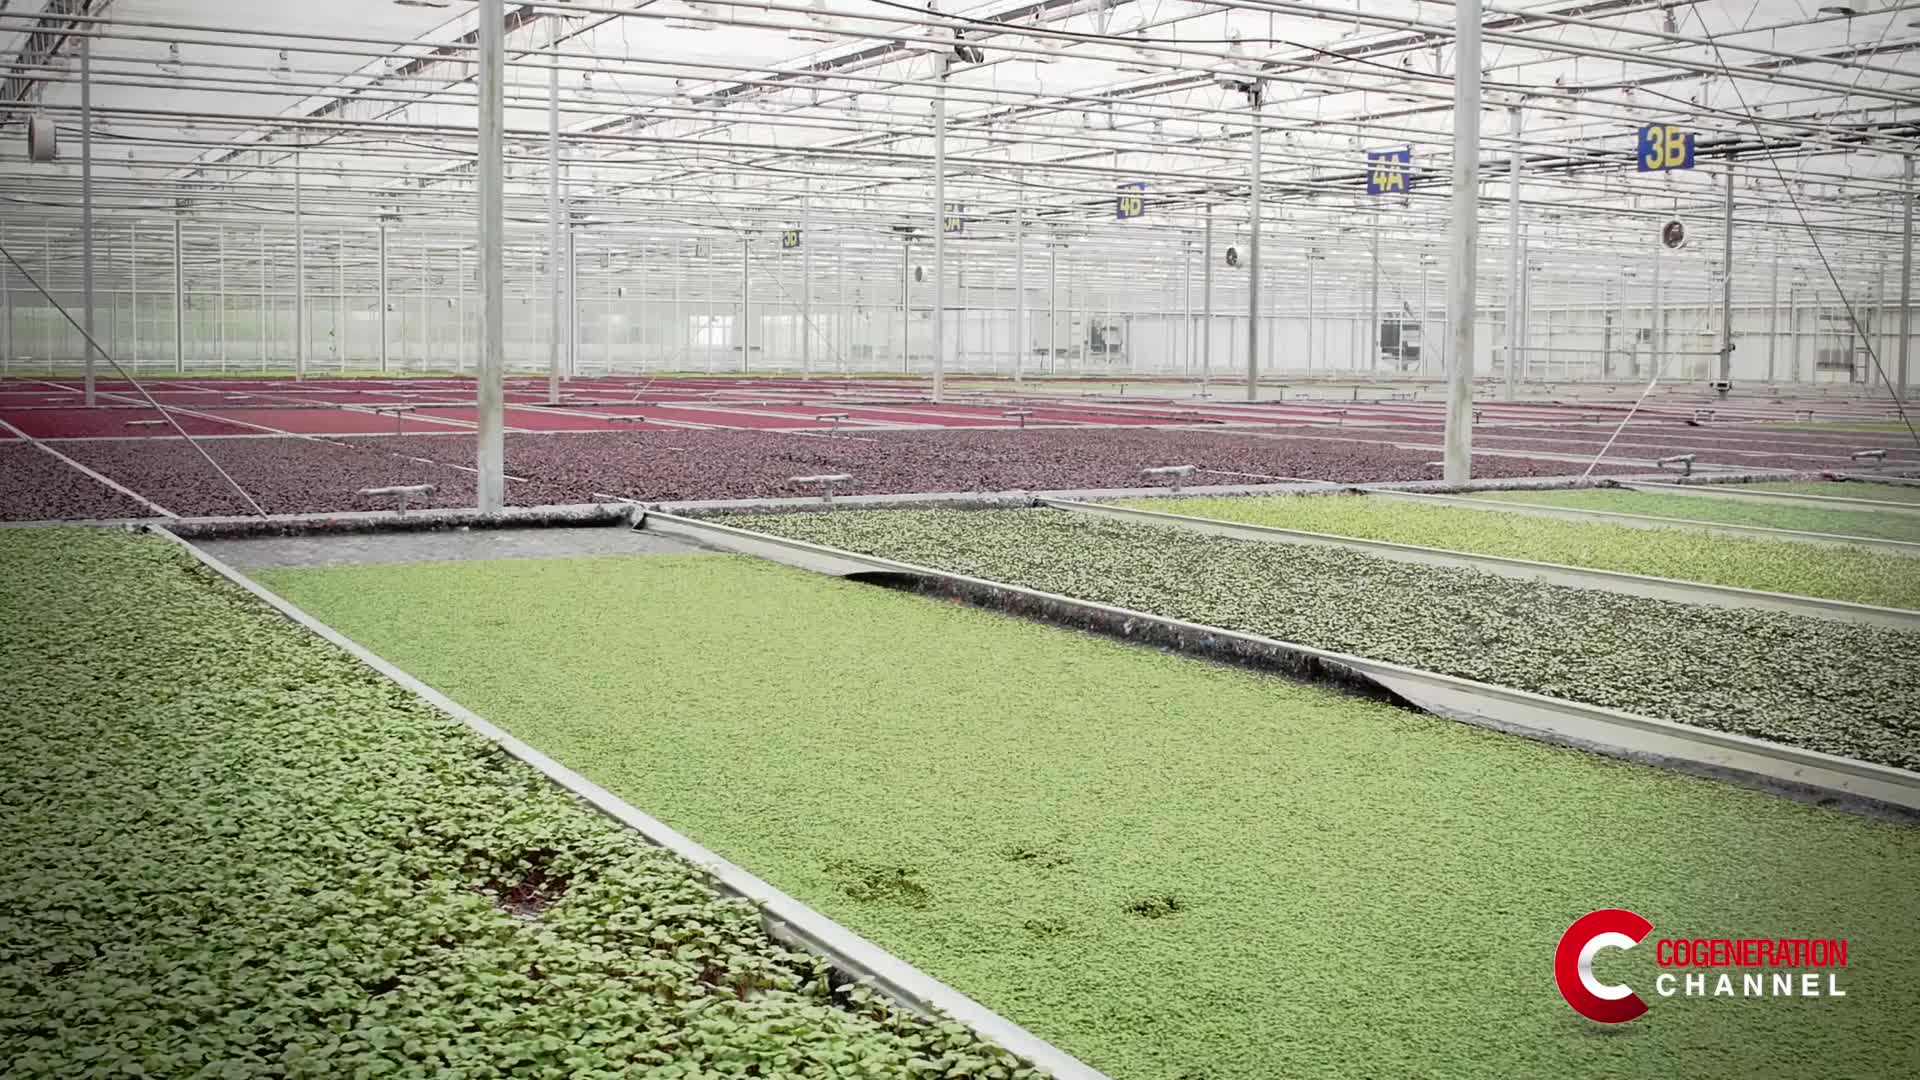 UK: 1.5 MW CHP plant sustainably heats greenhouse for edible flowers